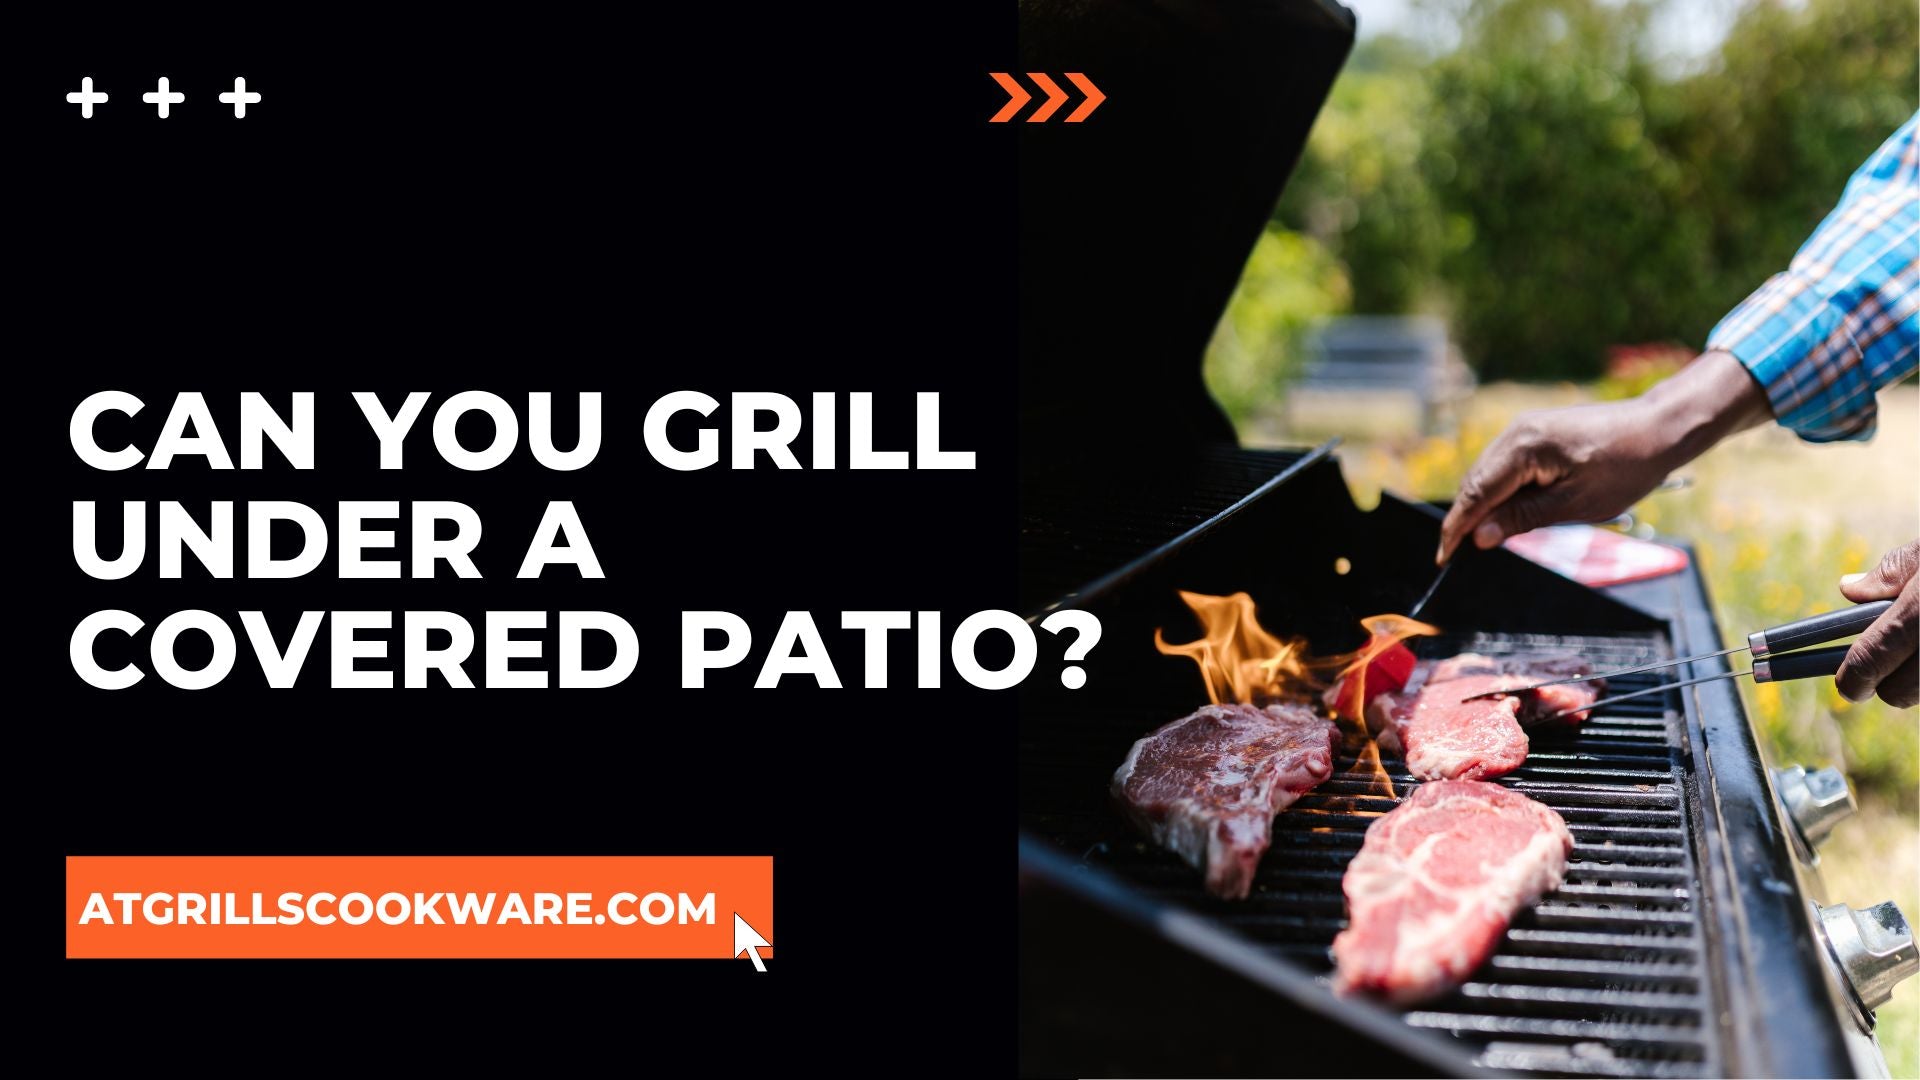 Can You Grill Under A Covered Patio?